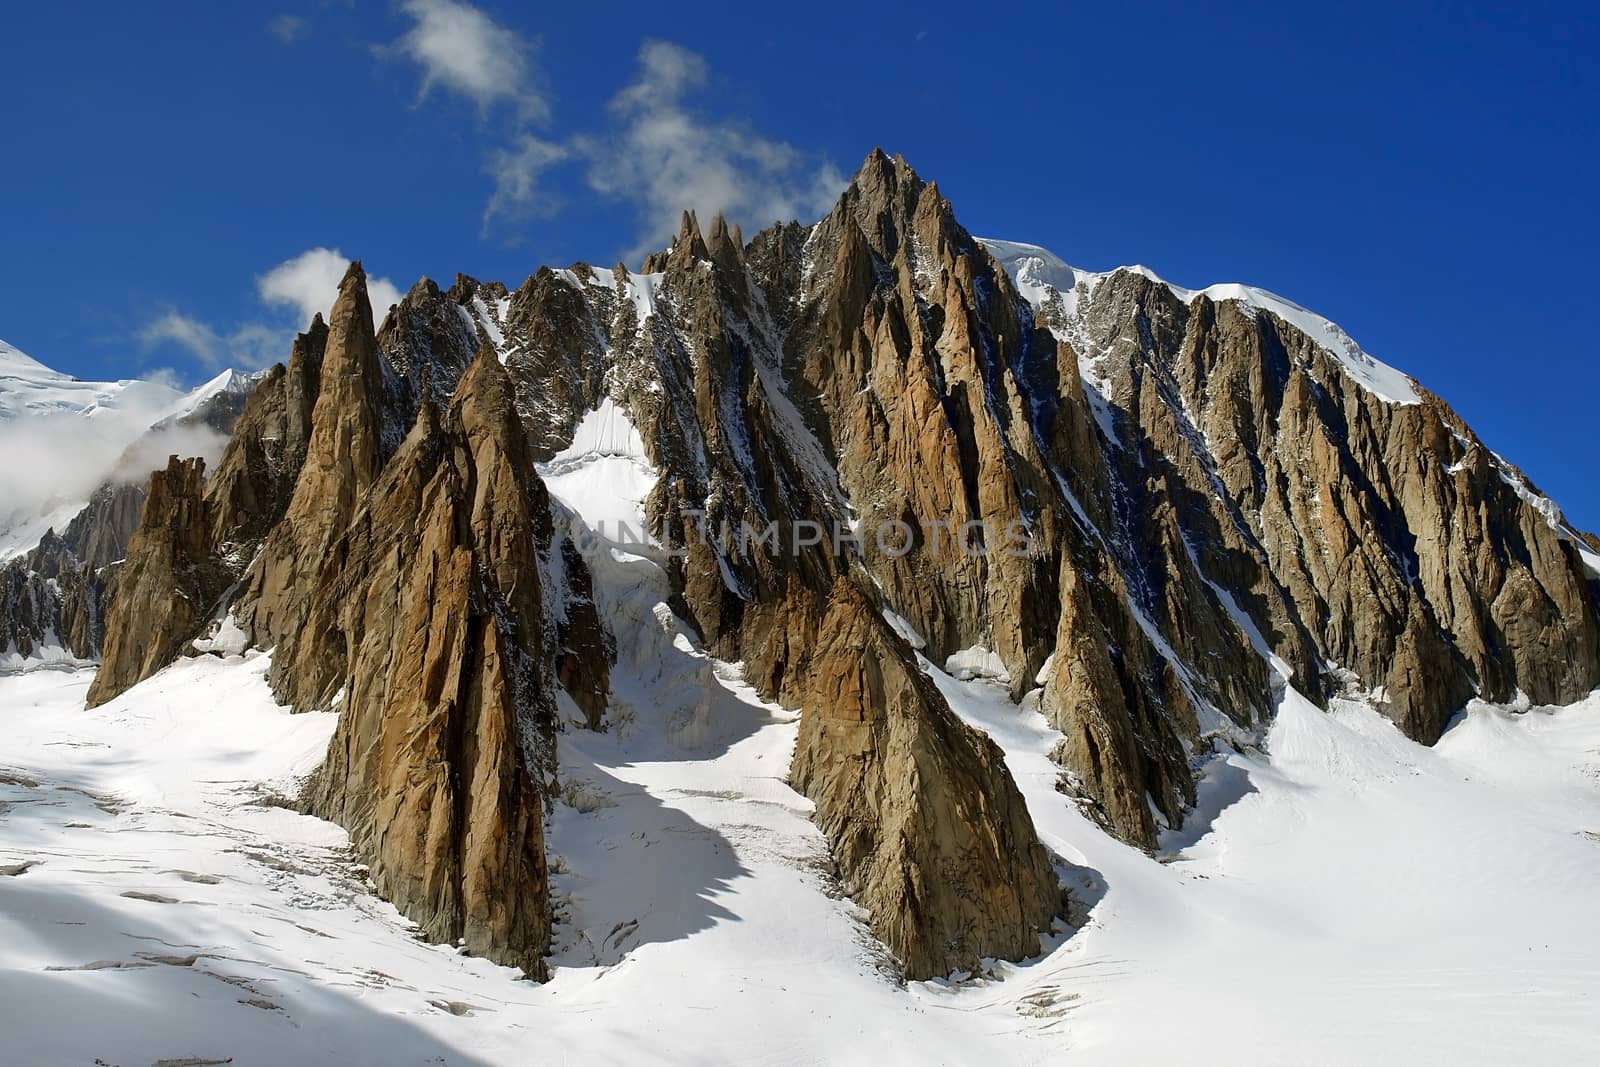 magnificent views of the steep snow-covered cliffs in the Swiss Alps